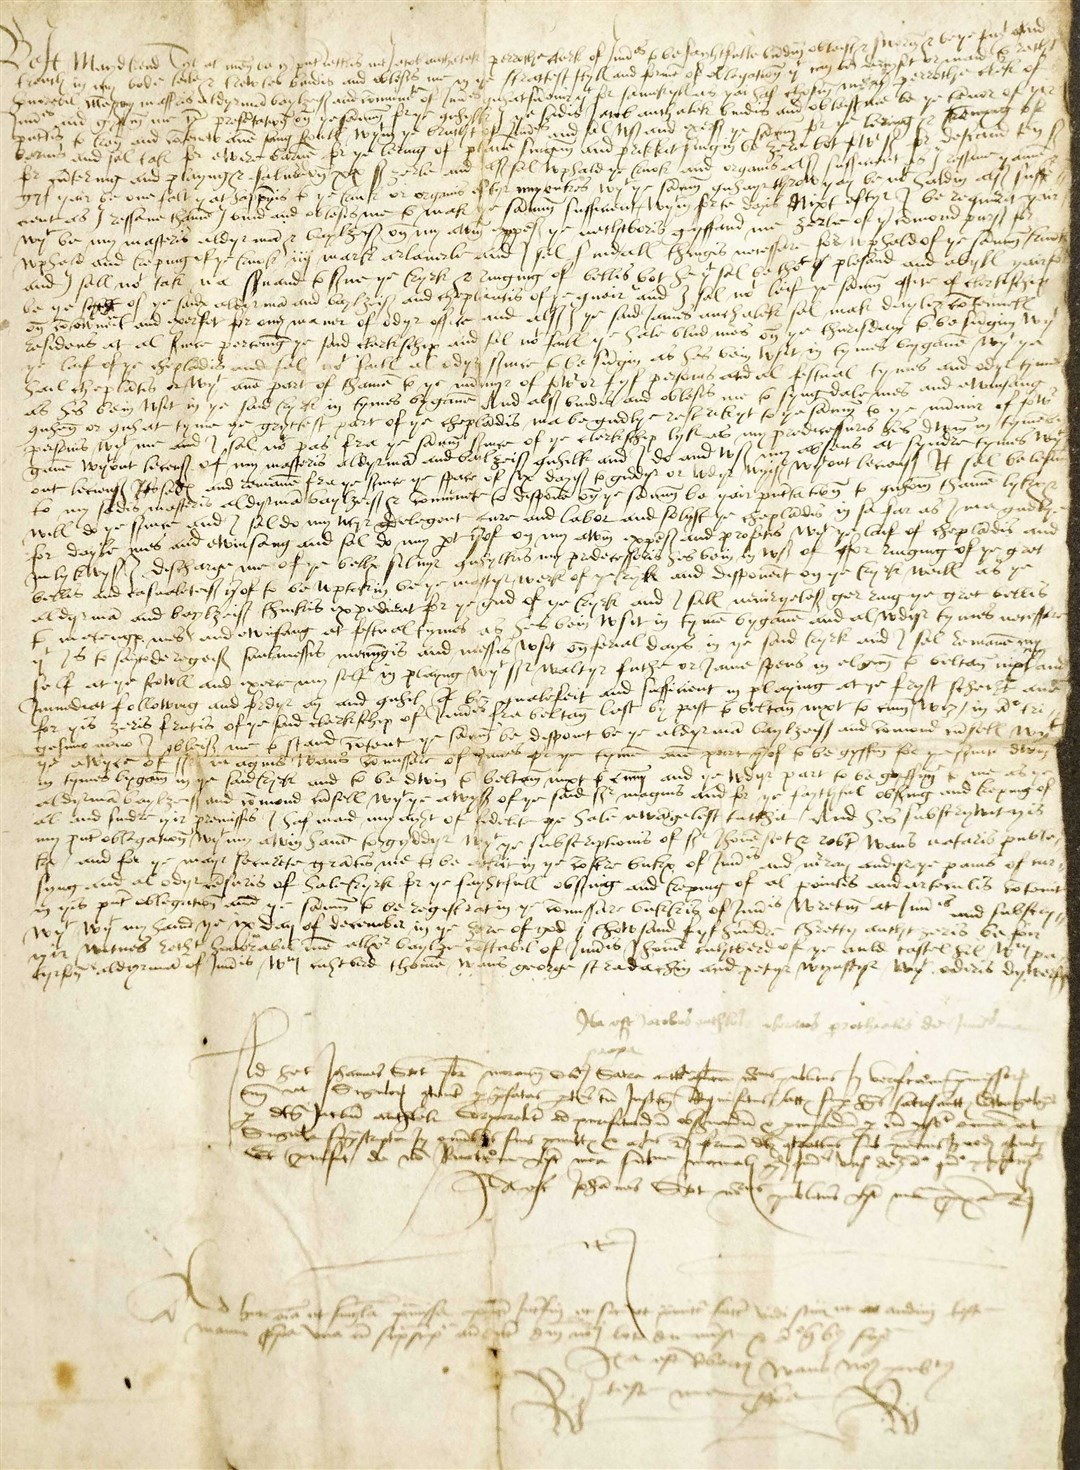 An extract from the Burgh of Inverness Town Clerk, Obligation by Sir Jacob Aucheleck, 1538.